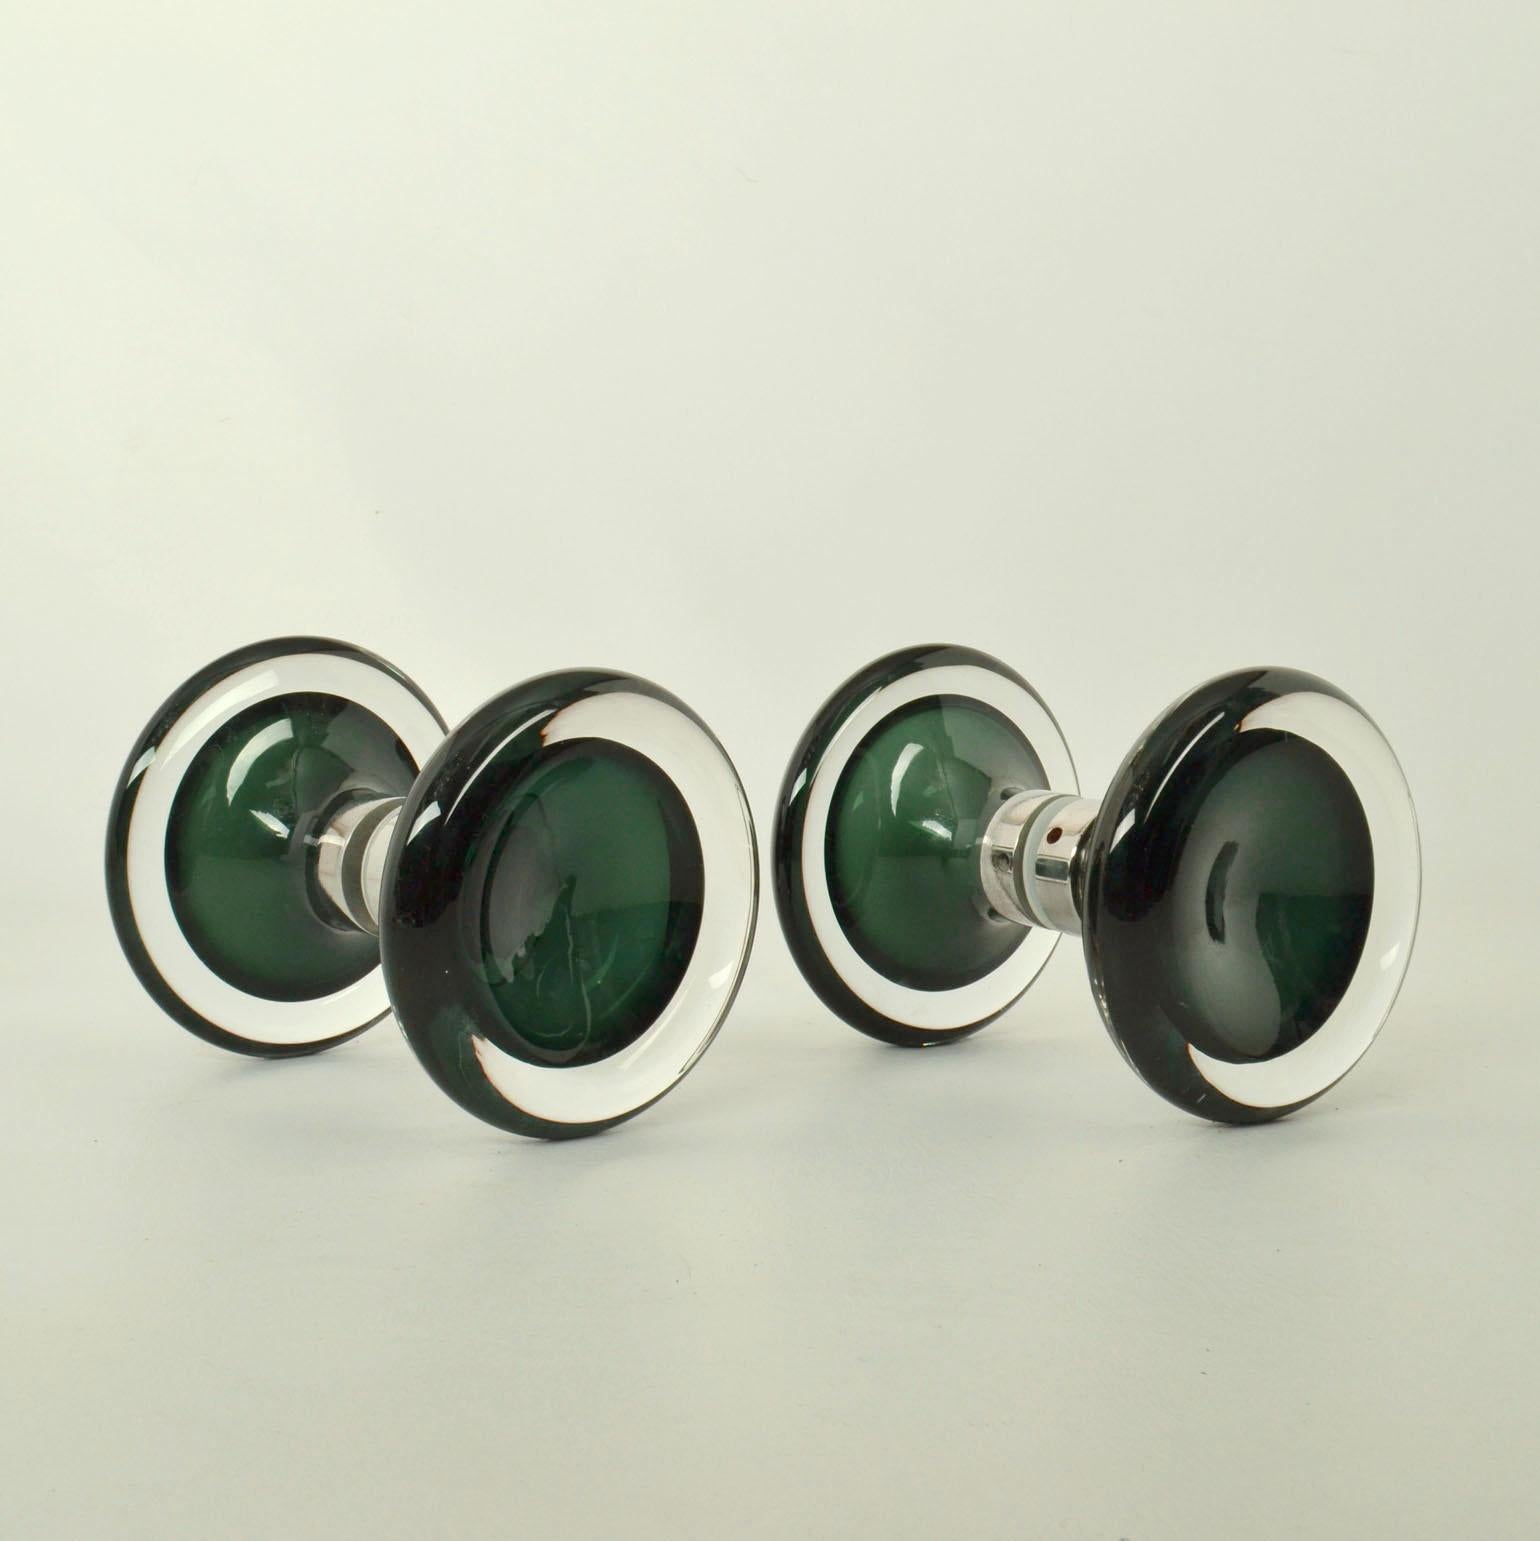 Two round double door handles in solid glass hand blown Sommerso Murano glass with center in emerald green and outer ring in clear glass with chrome fittings.
Sommerso is an Italian glass technique used in producing the handles to create several